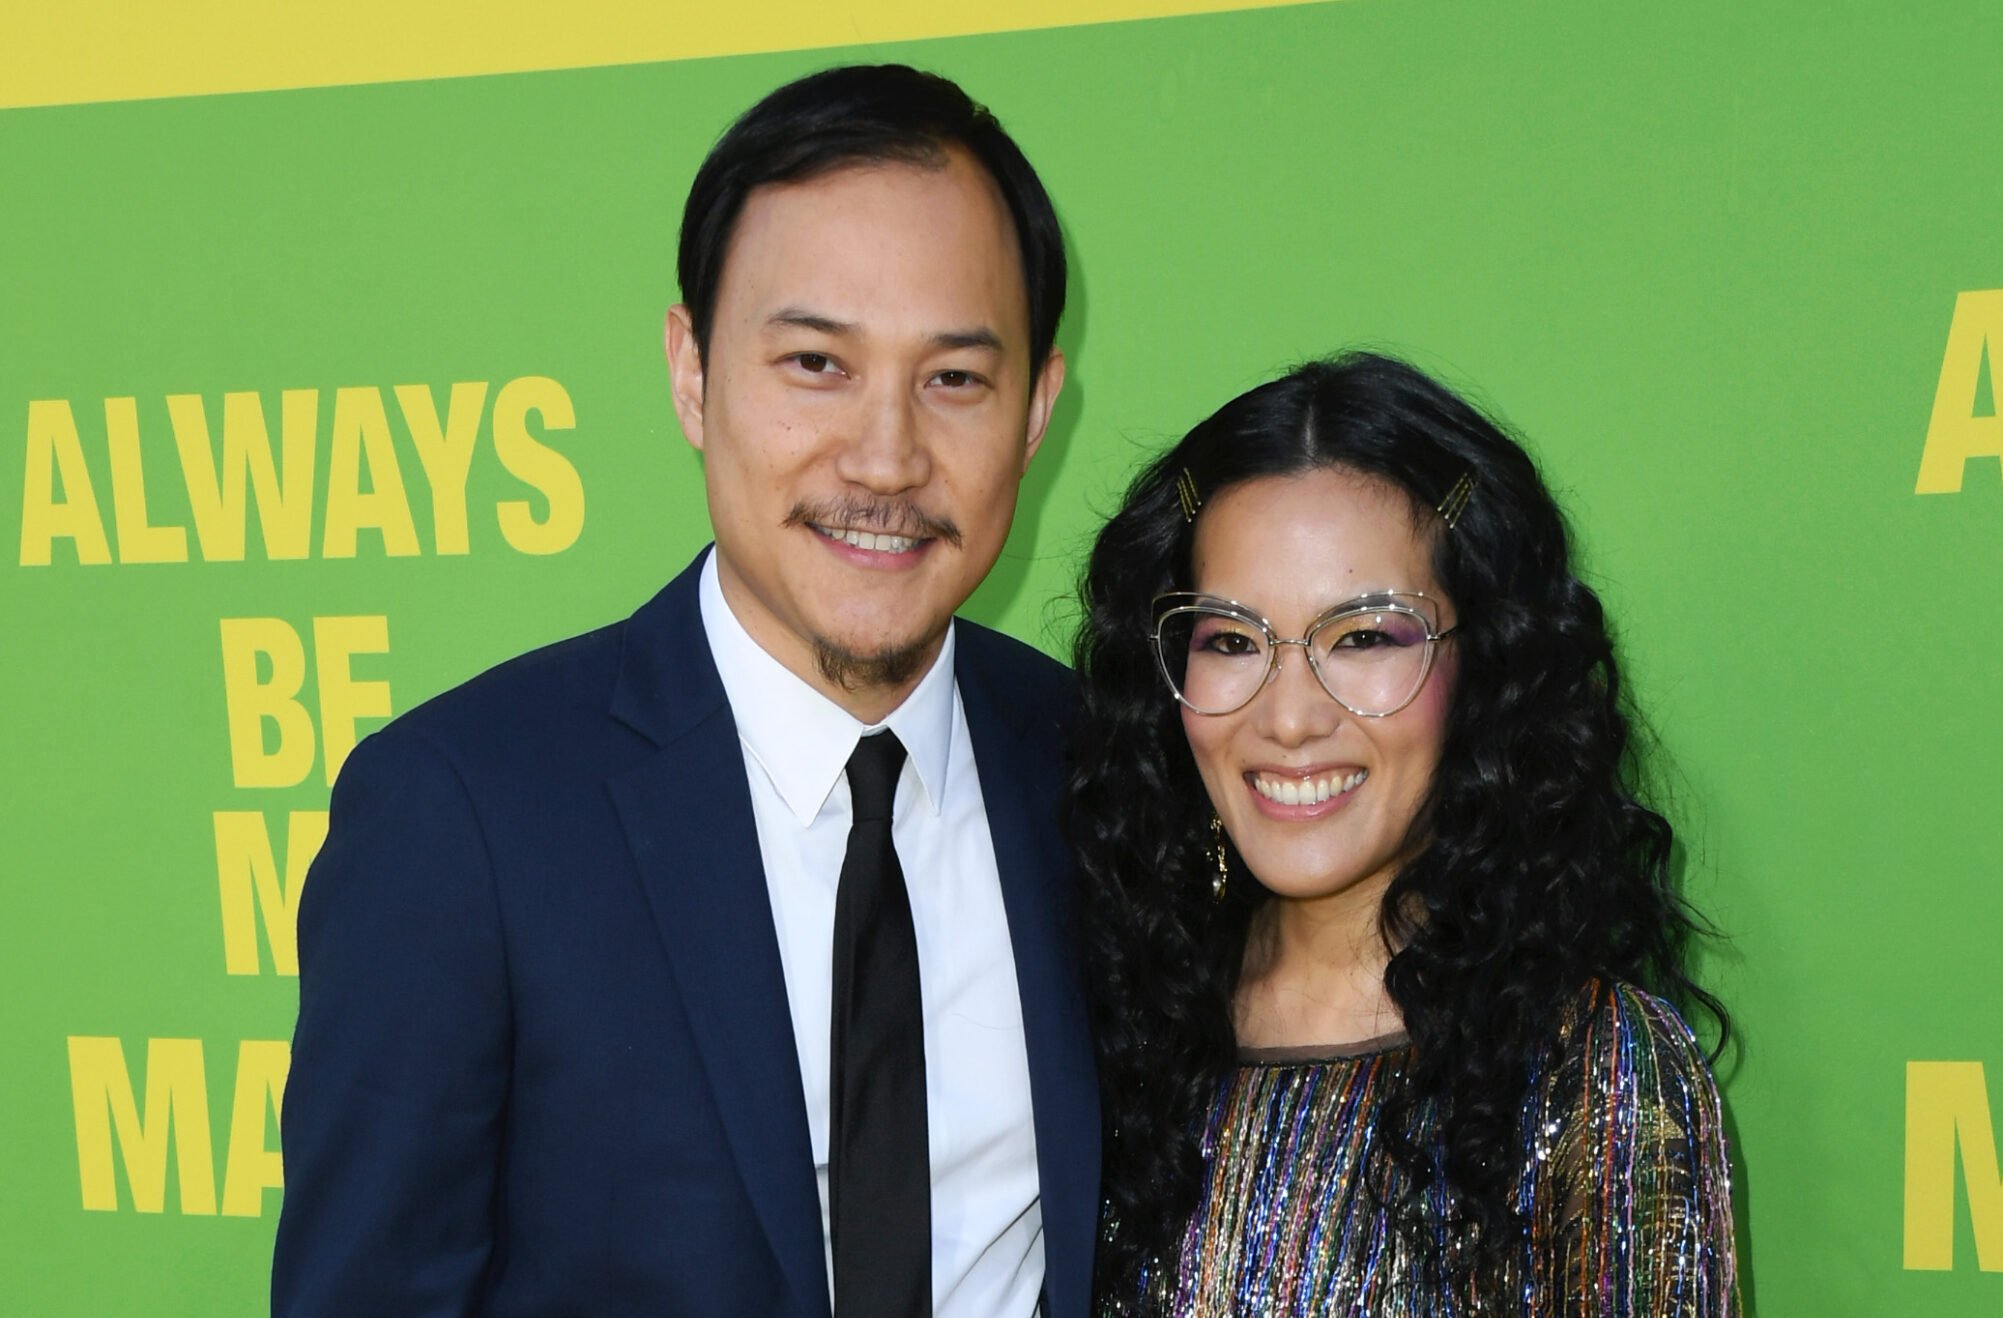 Why Ali Wong And Her Husband, Justin Hakuta, Are A Perfect Match